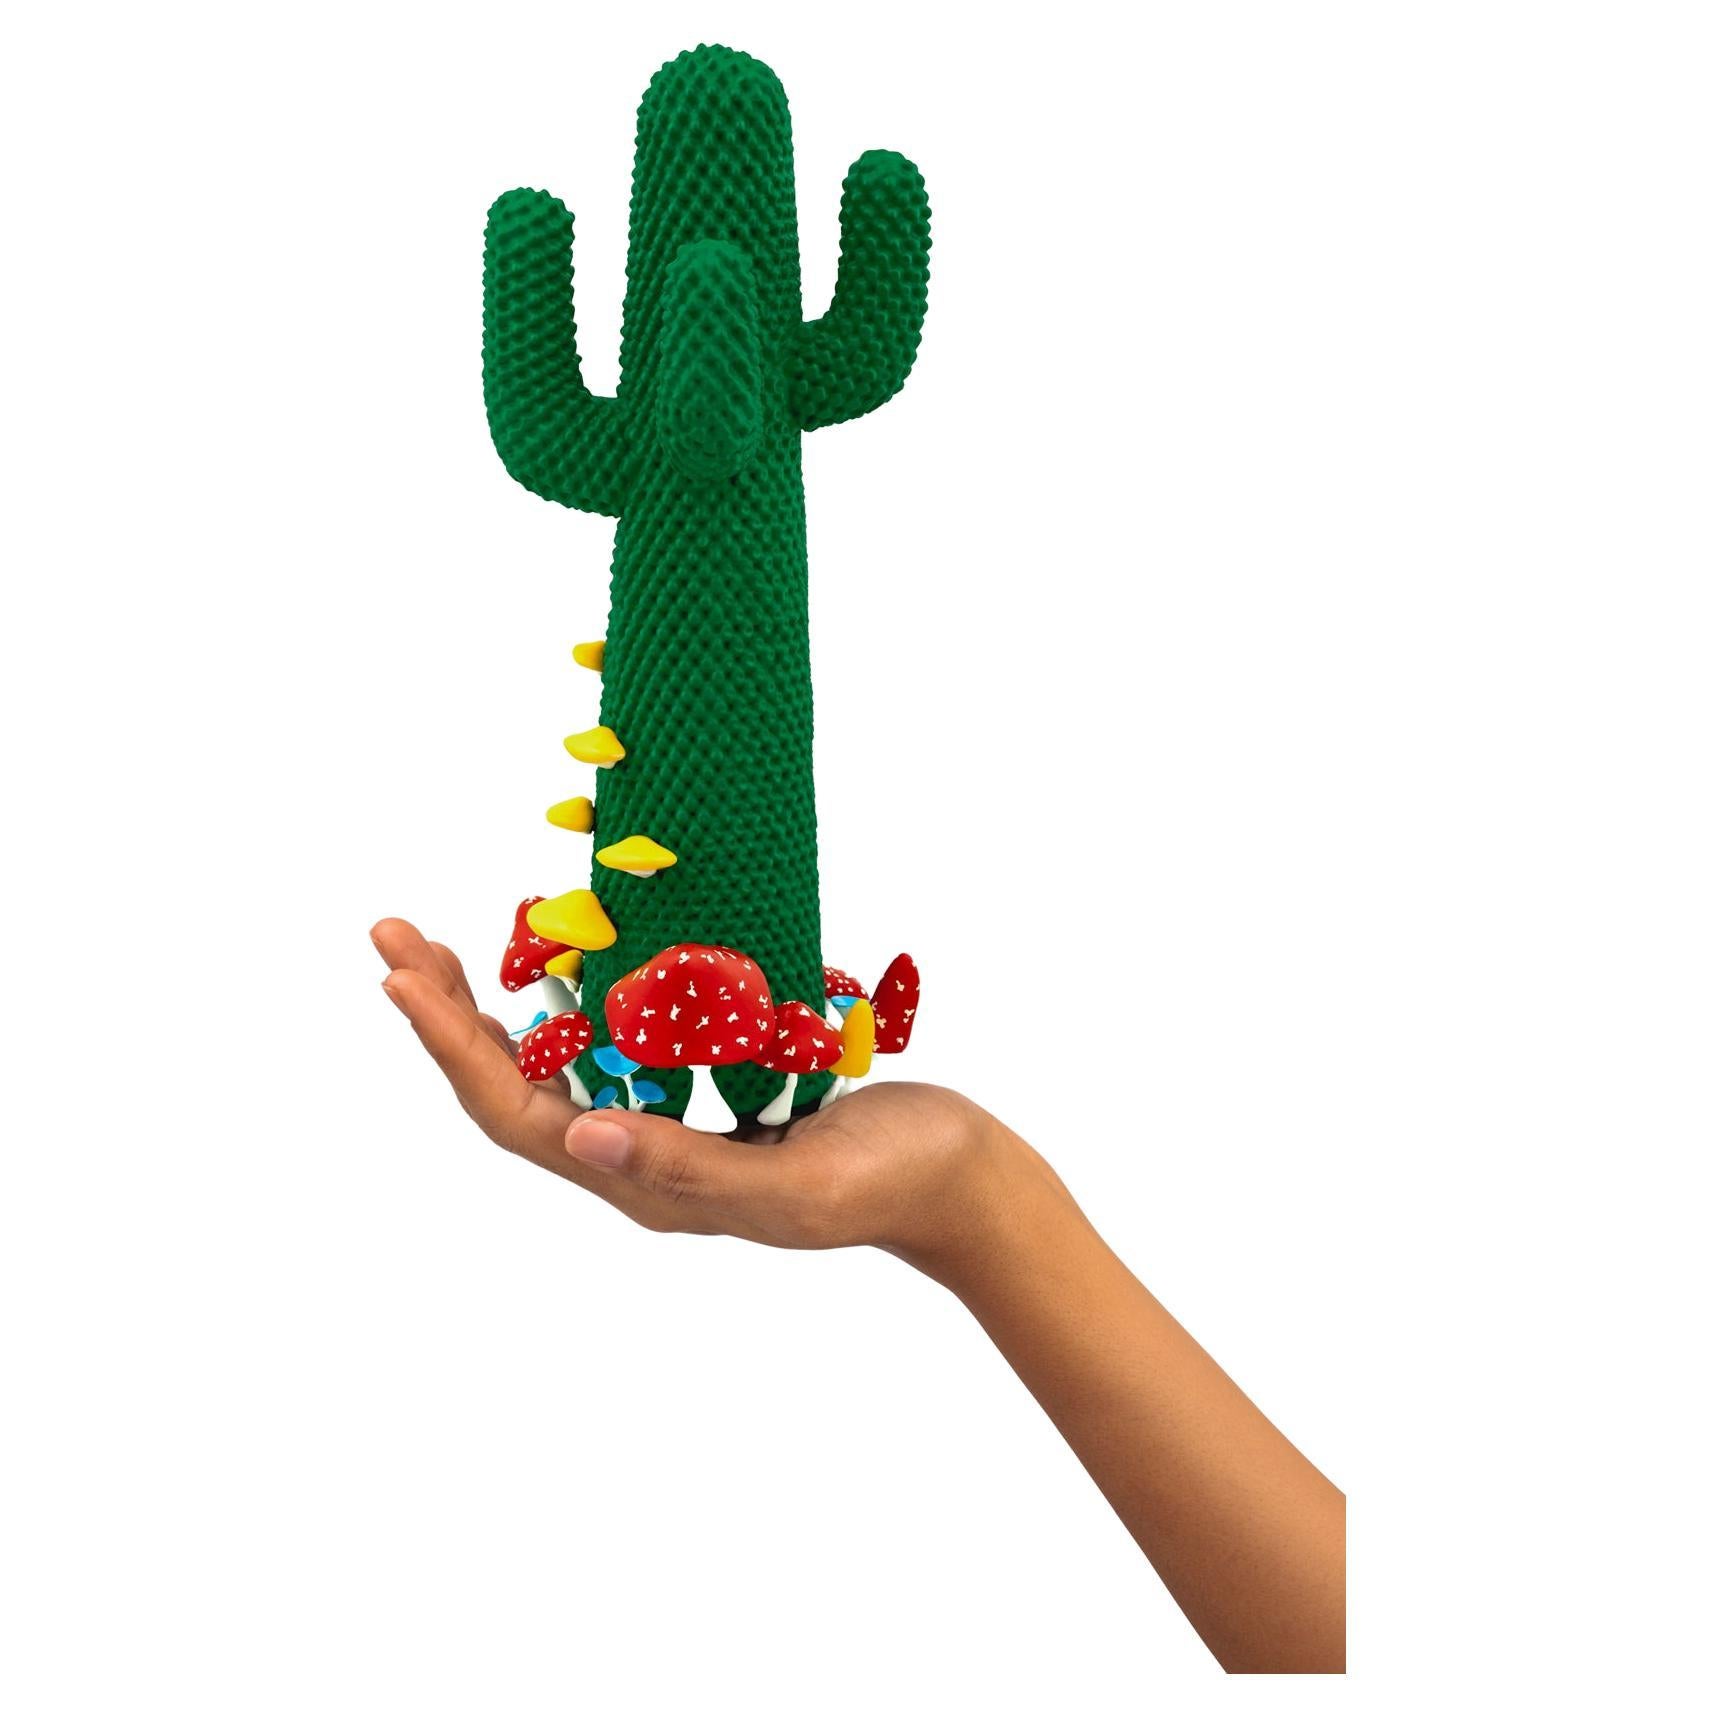 Limited Edition #47/99

Gufram presents the miniaturised version of the Shroom CACTUS® created in collaboration with A$AP Rocky and the artist’s new design studio HOMMEMADE Exactly as the real-size Shroom CACTUS®, the new Guframini piece features